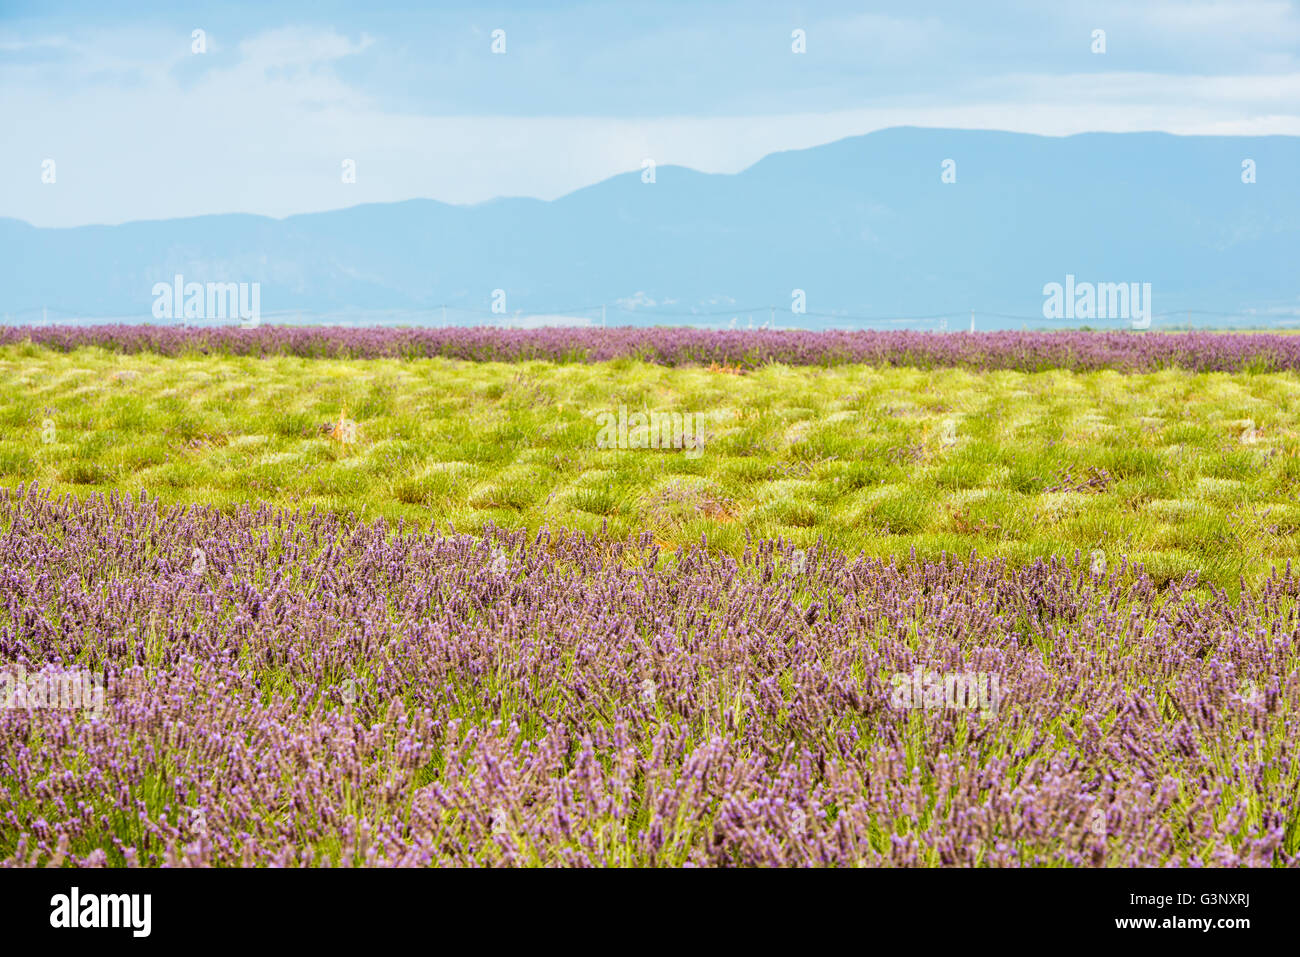 Rich colors of summer lavender field with green stalks and violet blossoms Stock Photo